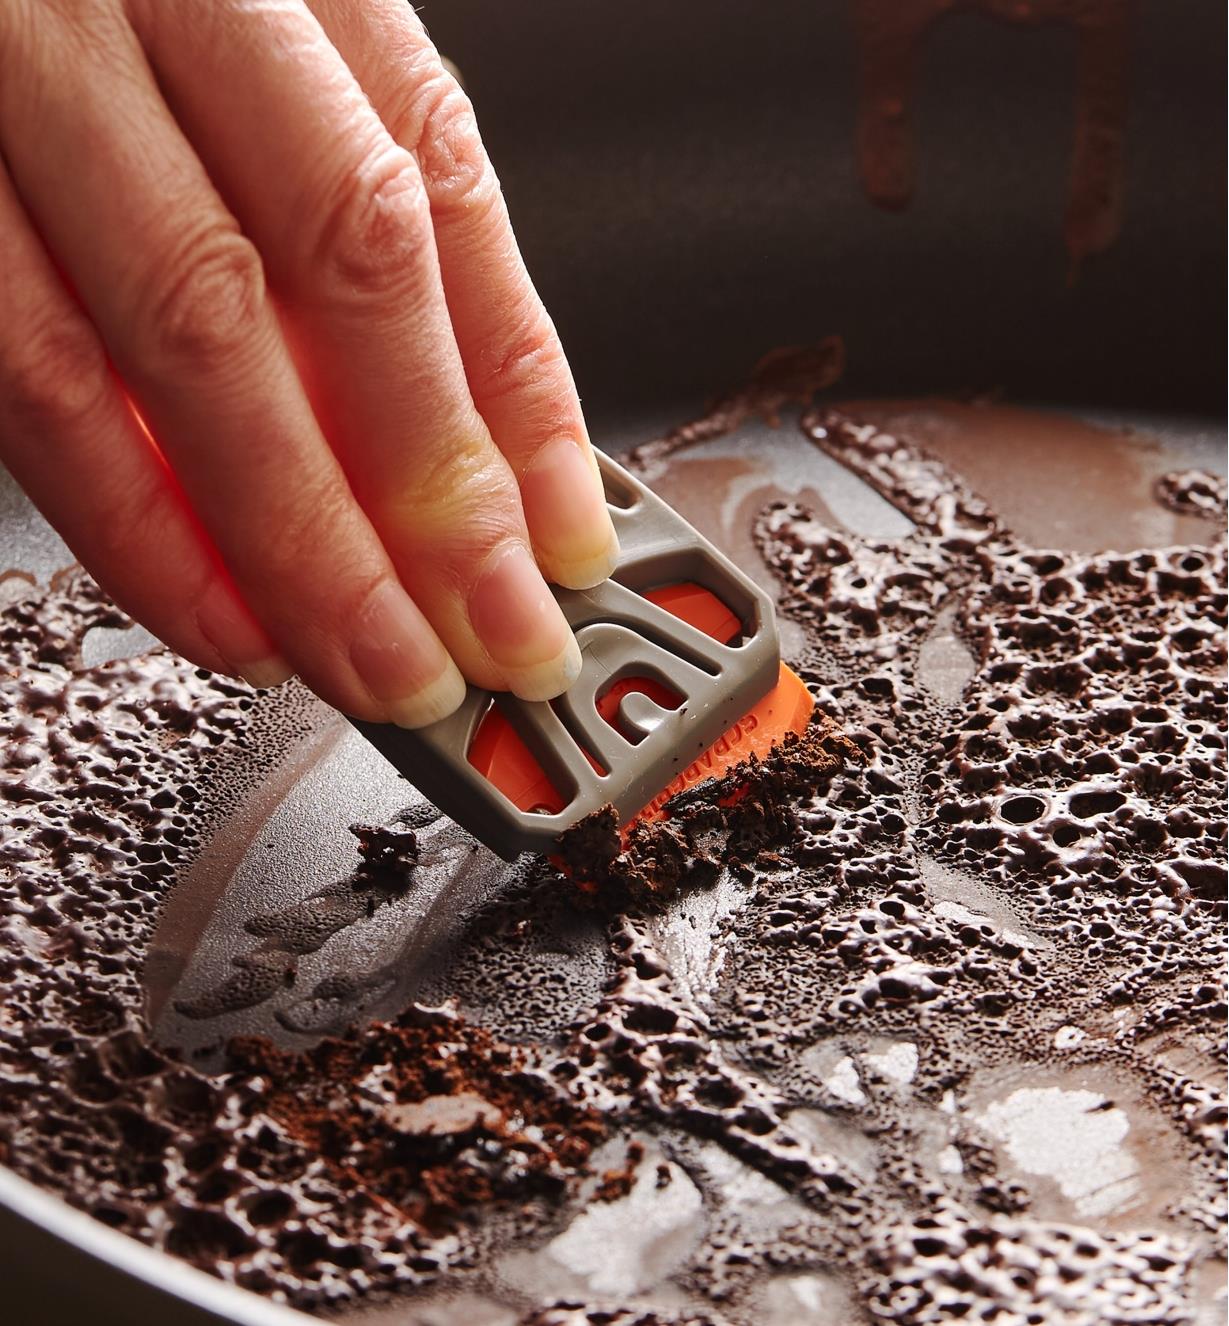 Scraping baked-on food off a pan using a razor blade in a holder